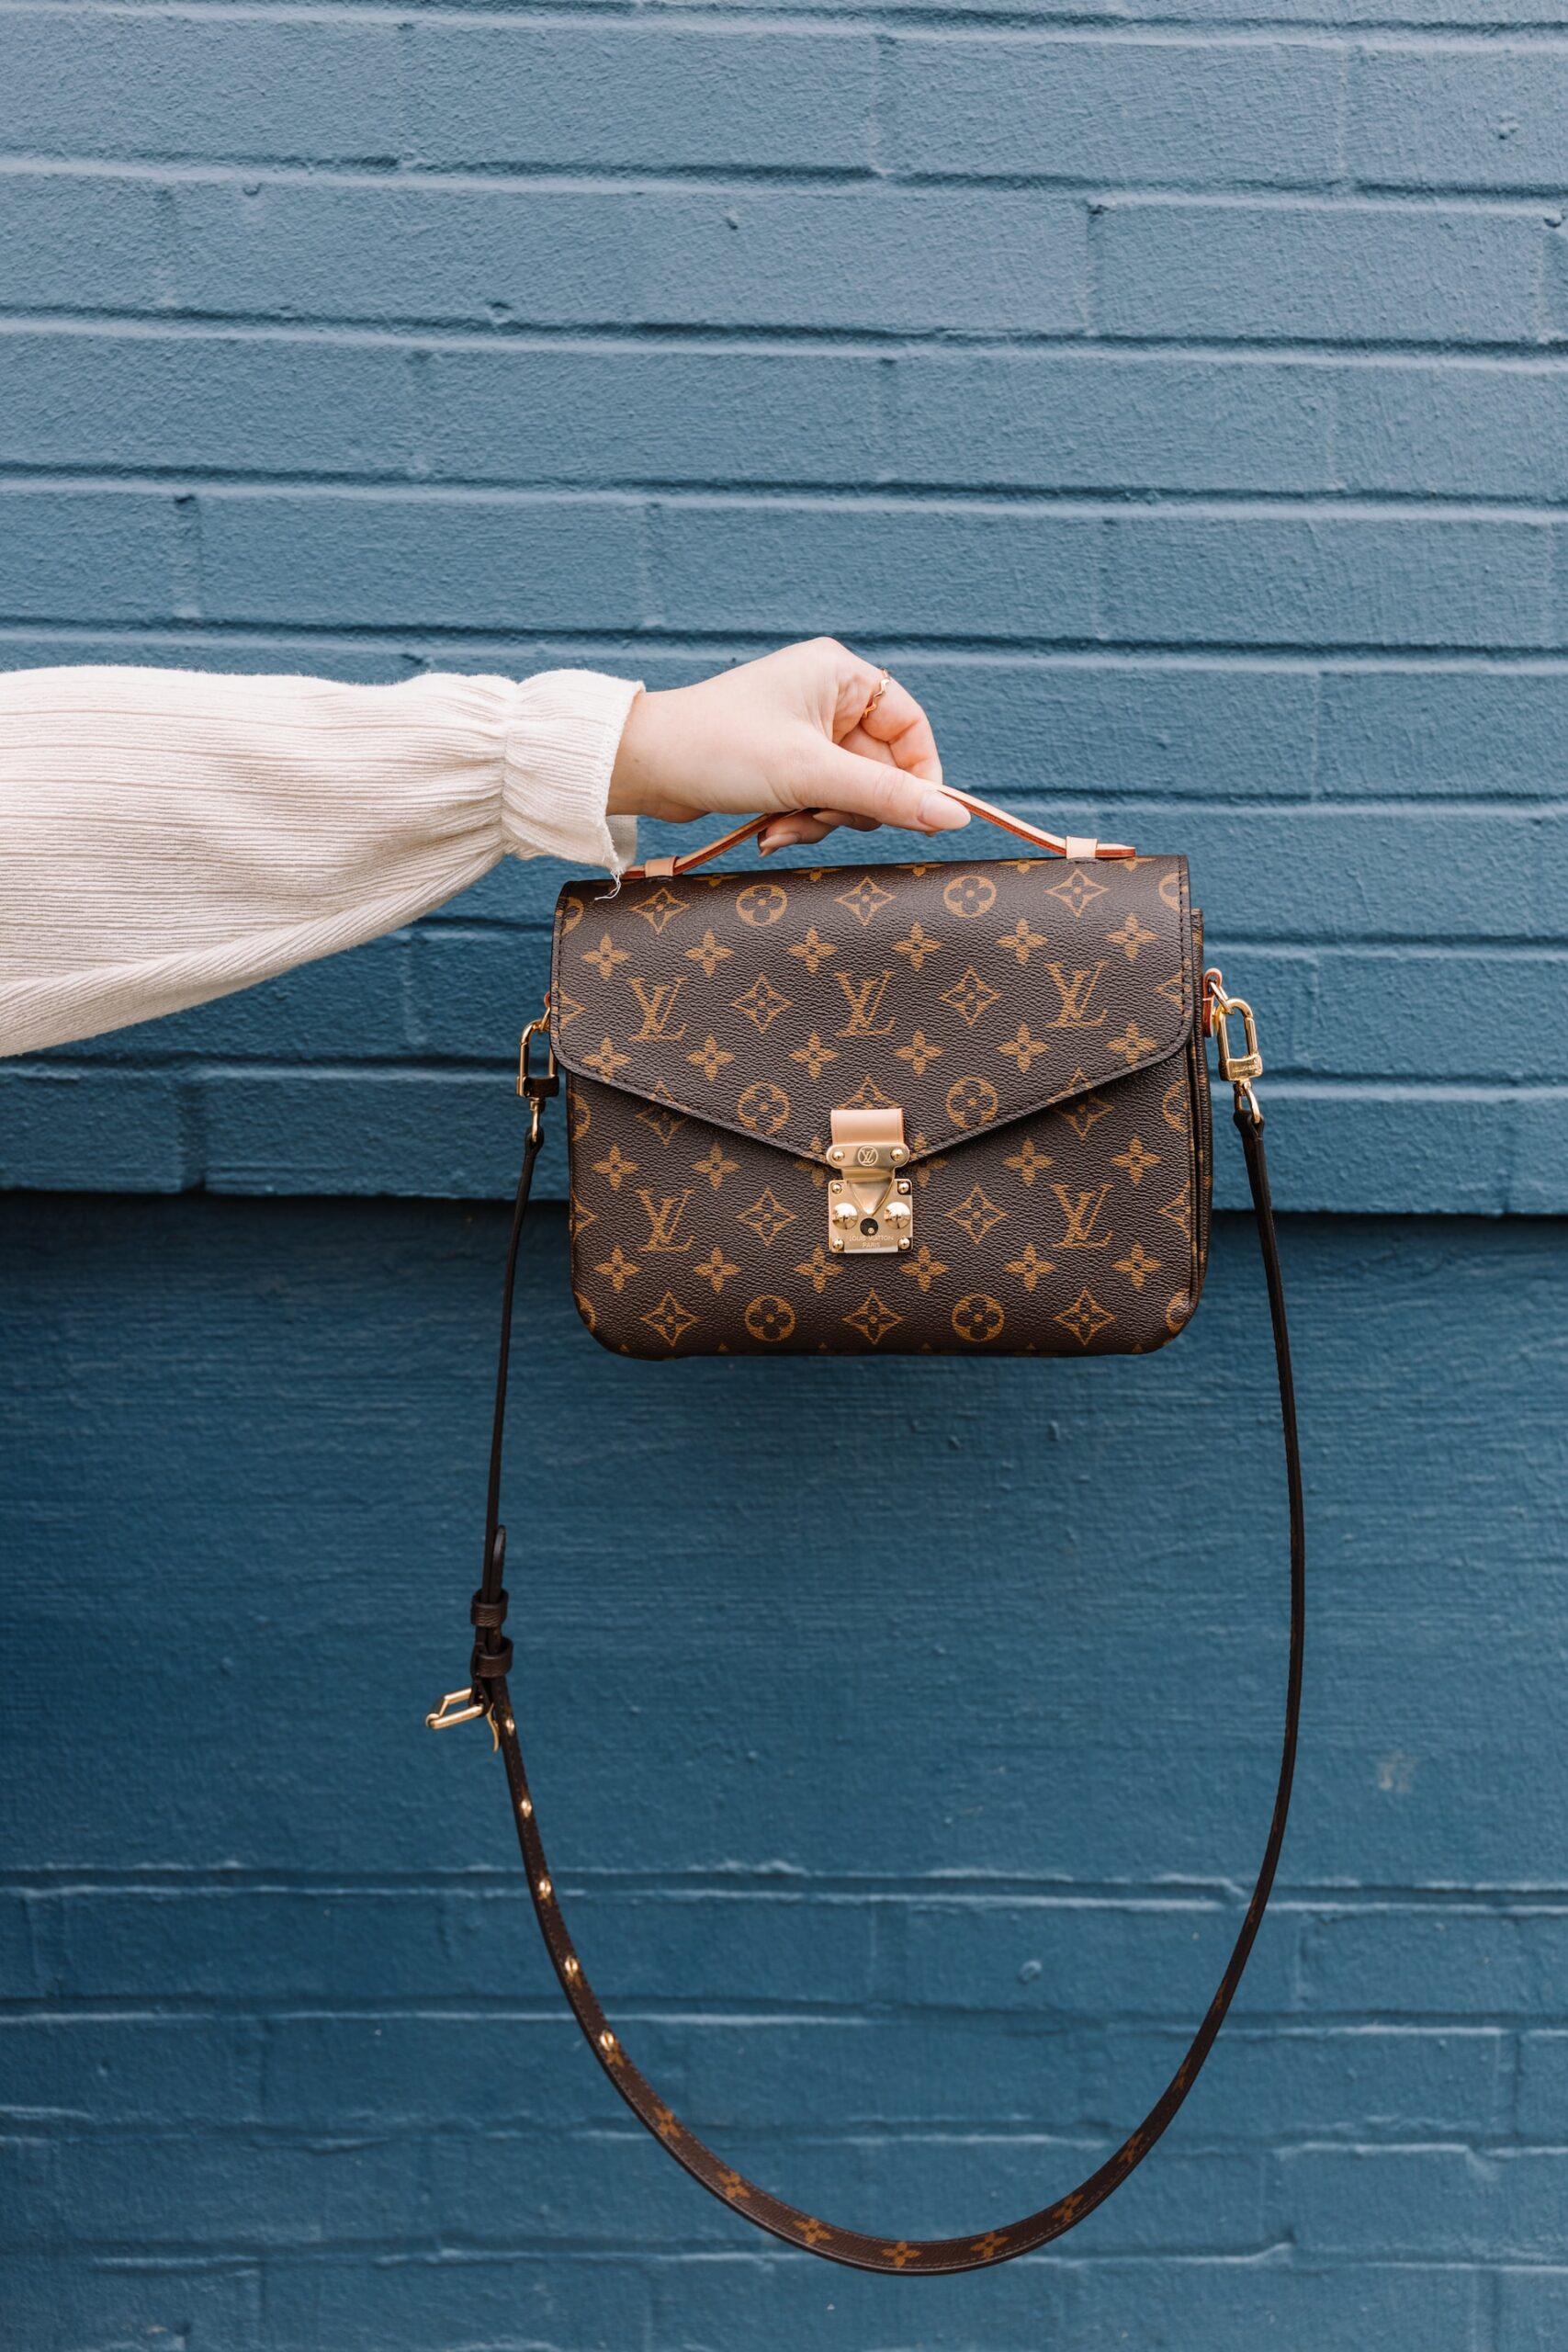 Why are Louis Vuitton's Leather Satchels Iconic and Timeless? - Borro